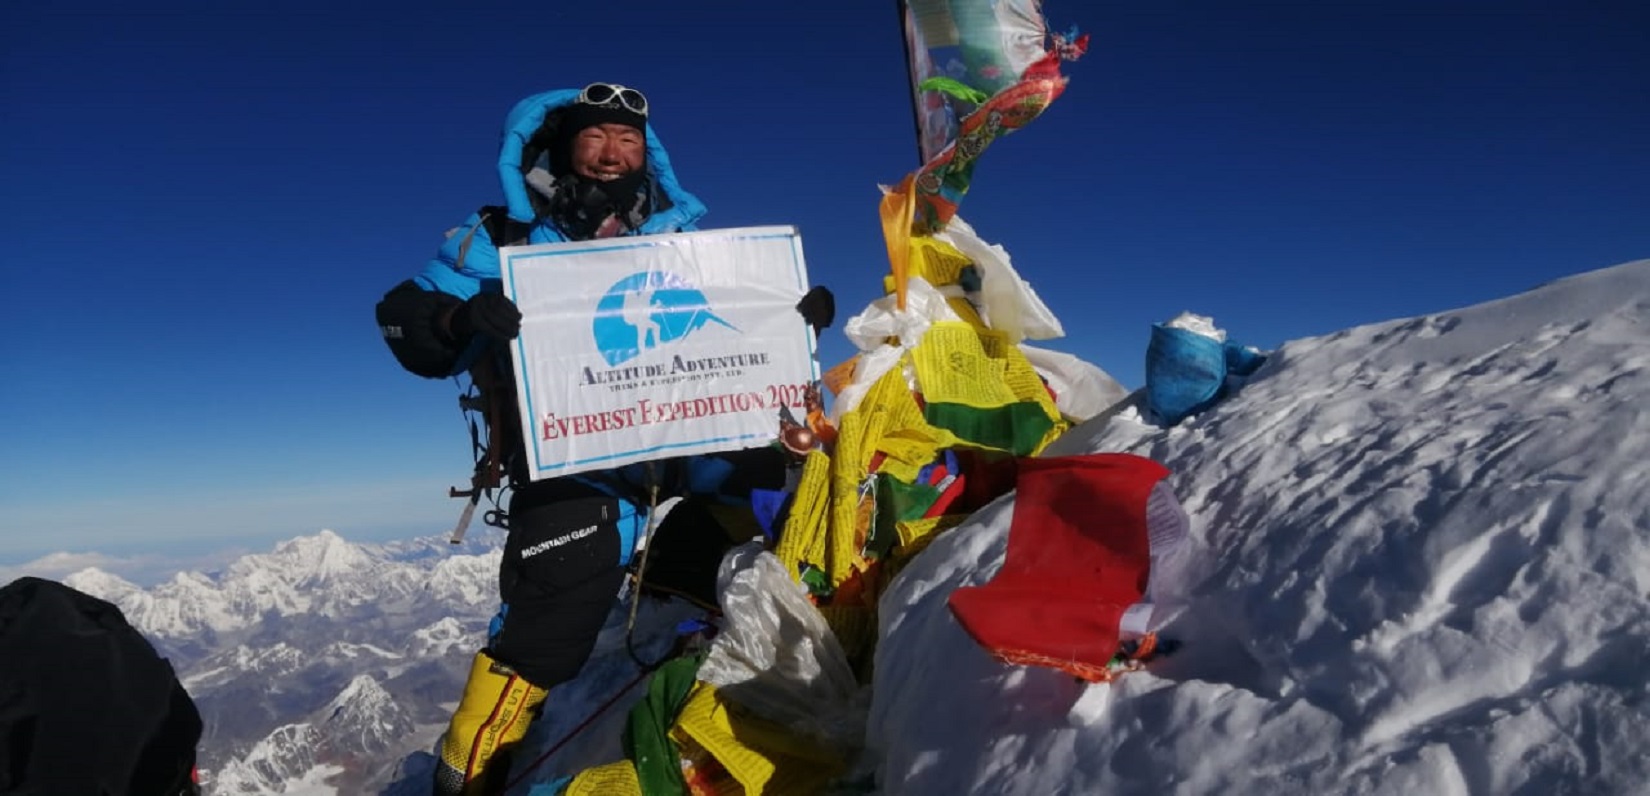 FAQS for Everest Expedition 